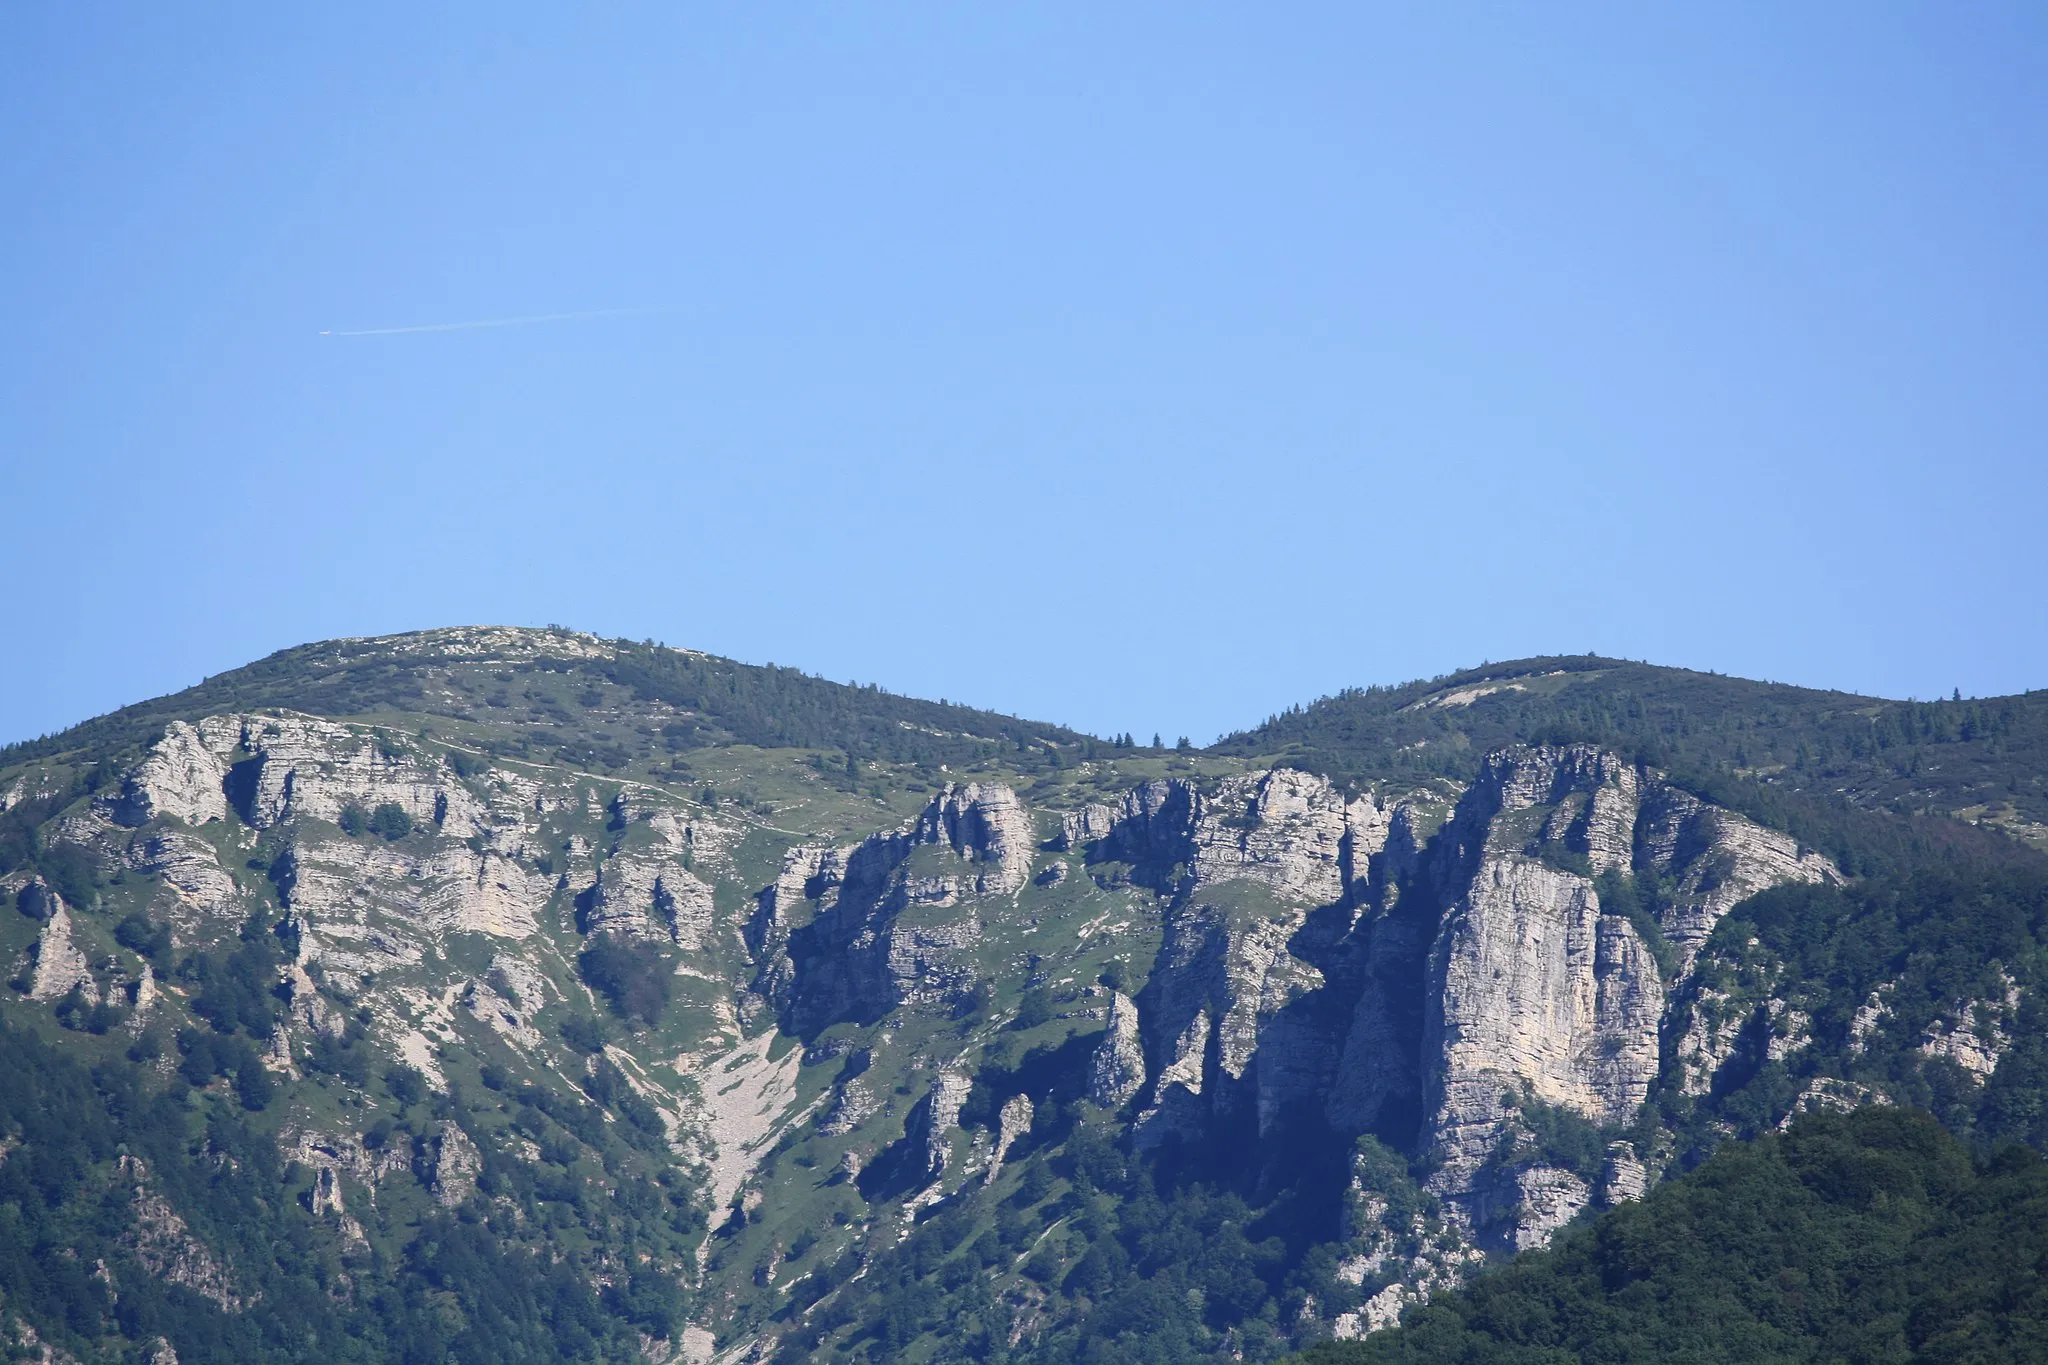 Photo showing: The shot was taken from the comune of Velo d'Astico (Vicenza, Italy) and shows Mount Toraro, which is part of the nearby Arsiero municipality.